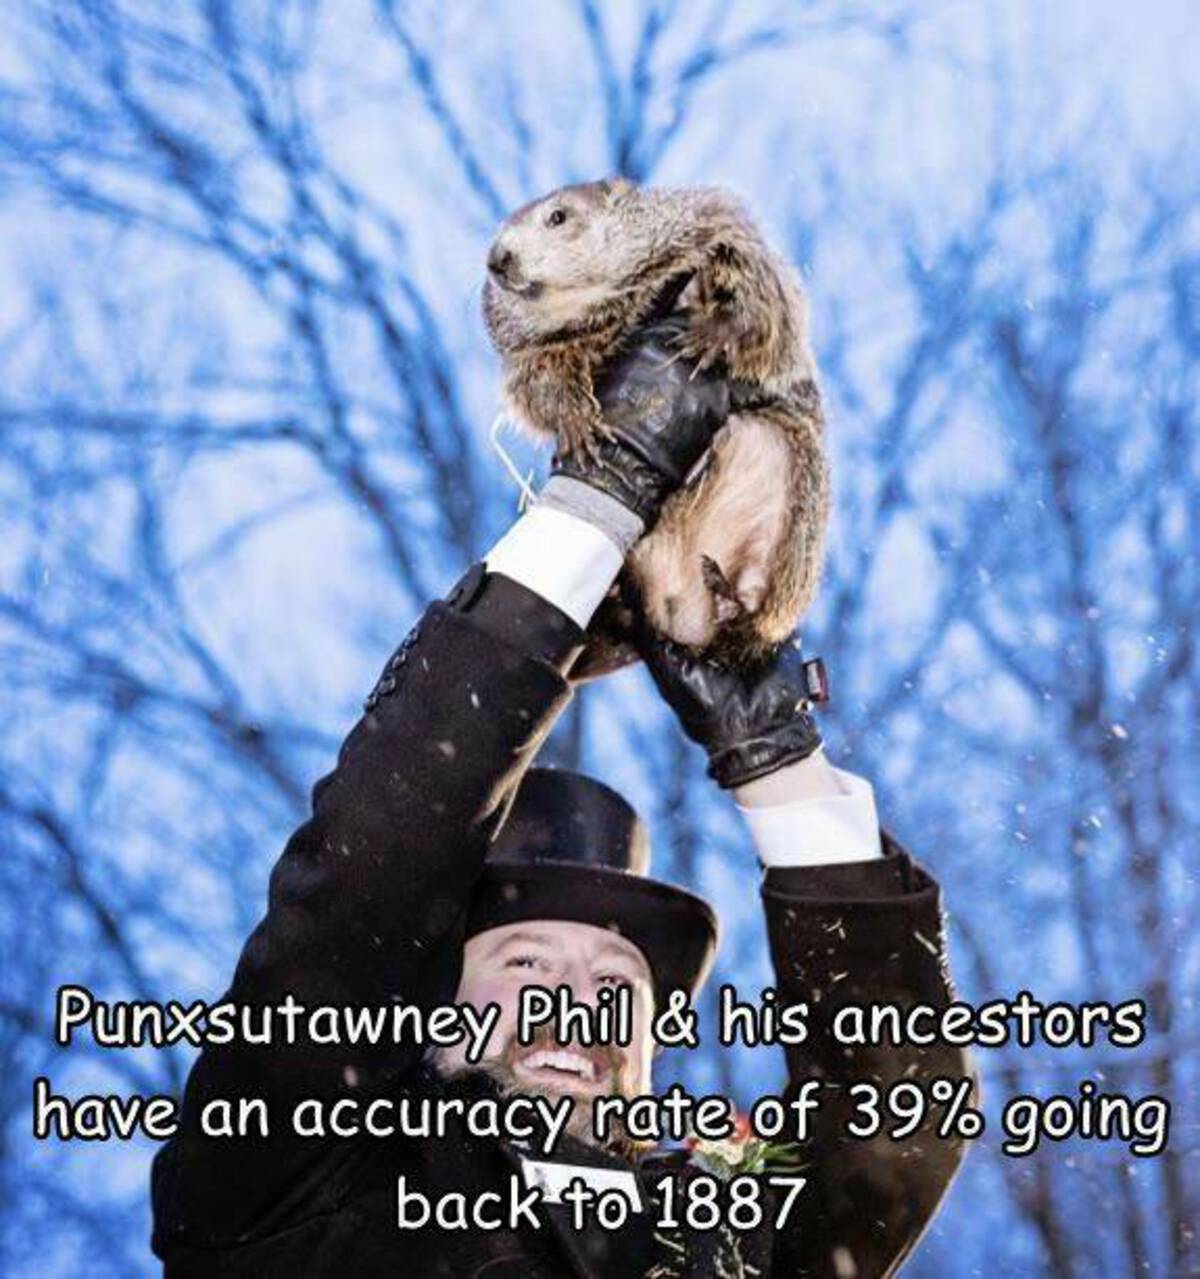 photo caption - Punxsutawney Phil & his ancestors have an accuracy rate of 39% going back to 1887